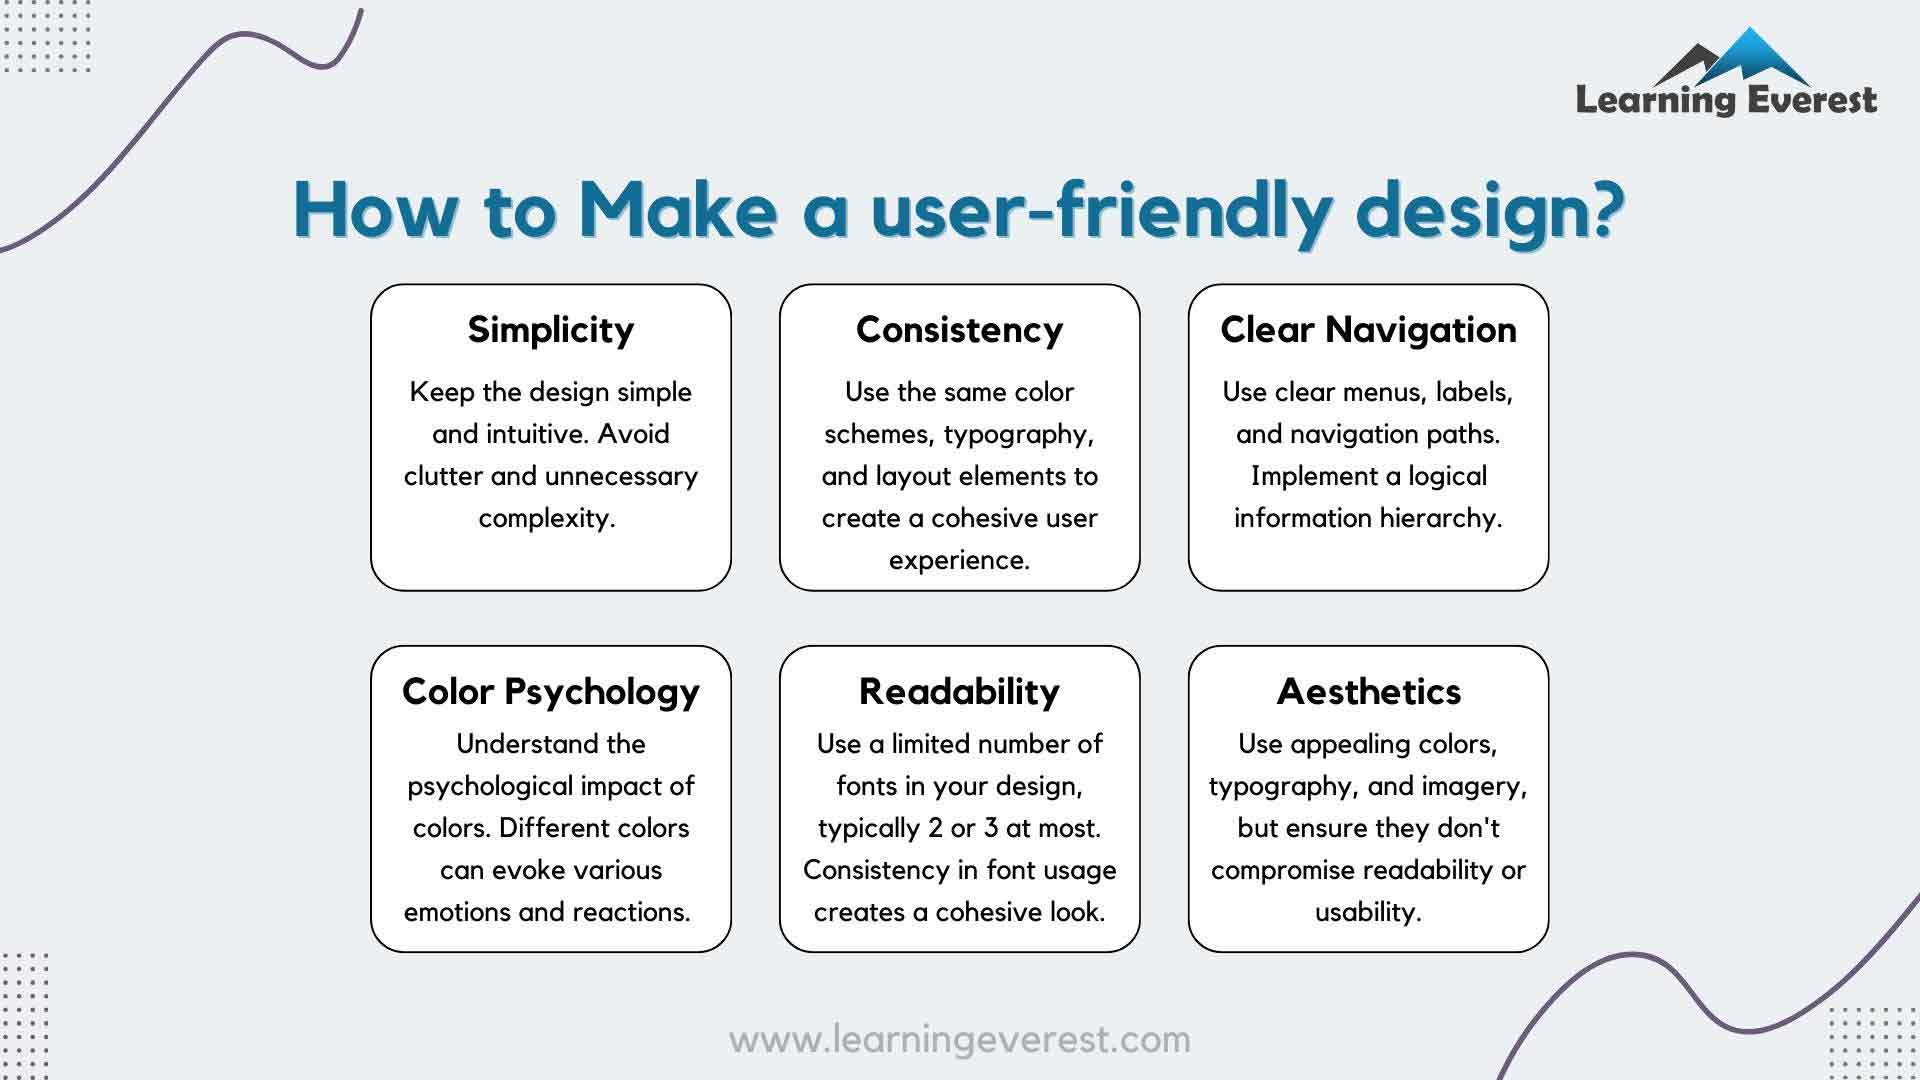 Guidelines for designing sales and marketing training module  - Make it user-friendly